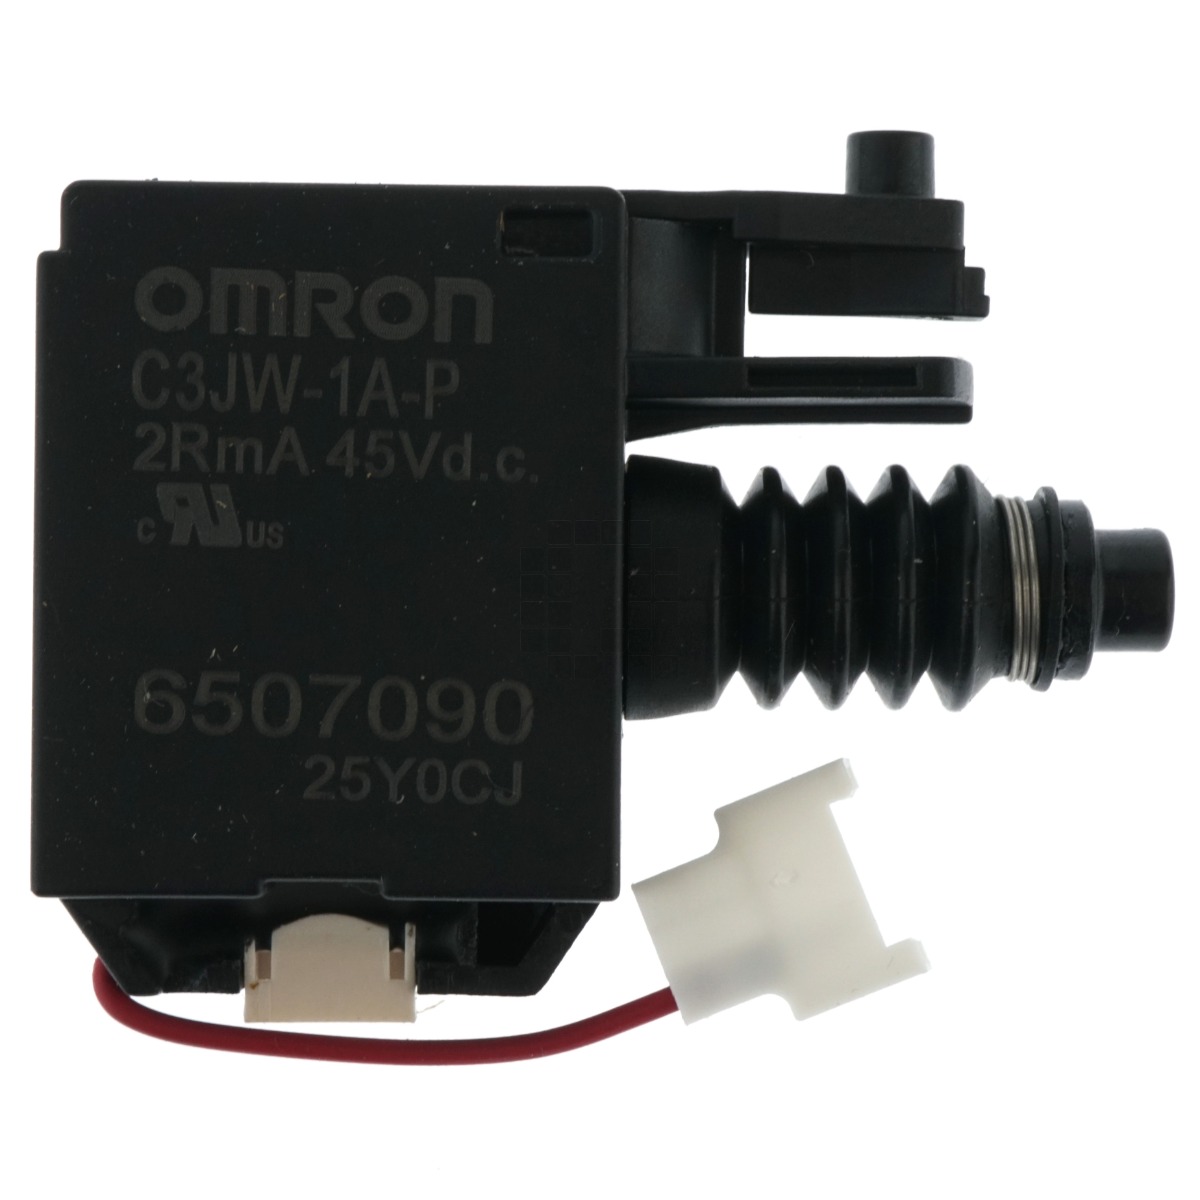 Makita 650709-0 Forward/Reverse Variable Speed Switch, Omron C3JW-1A-P